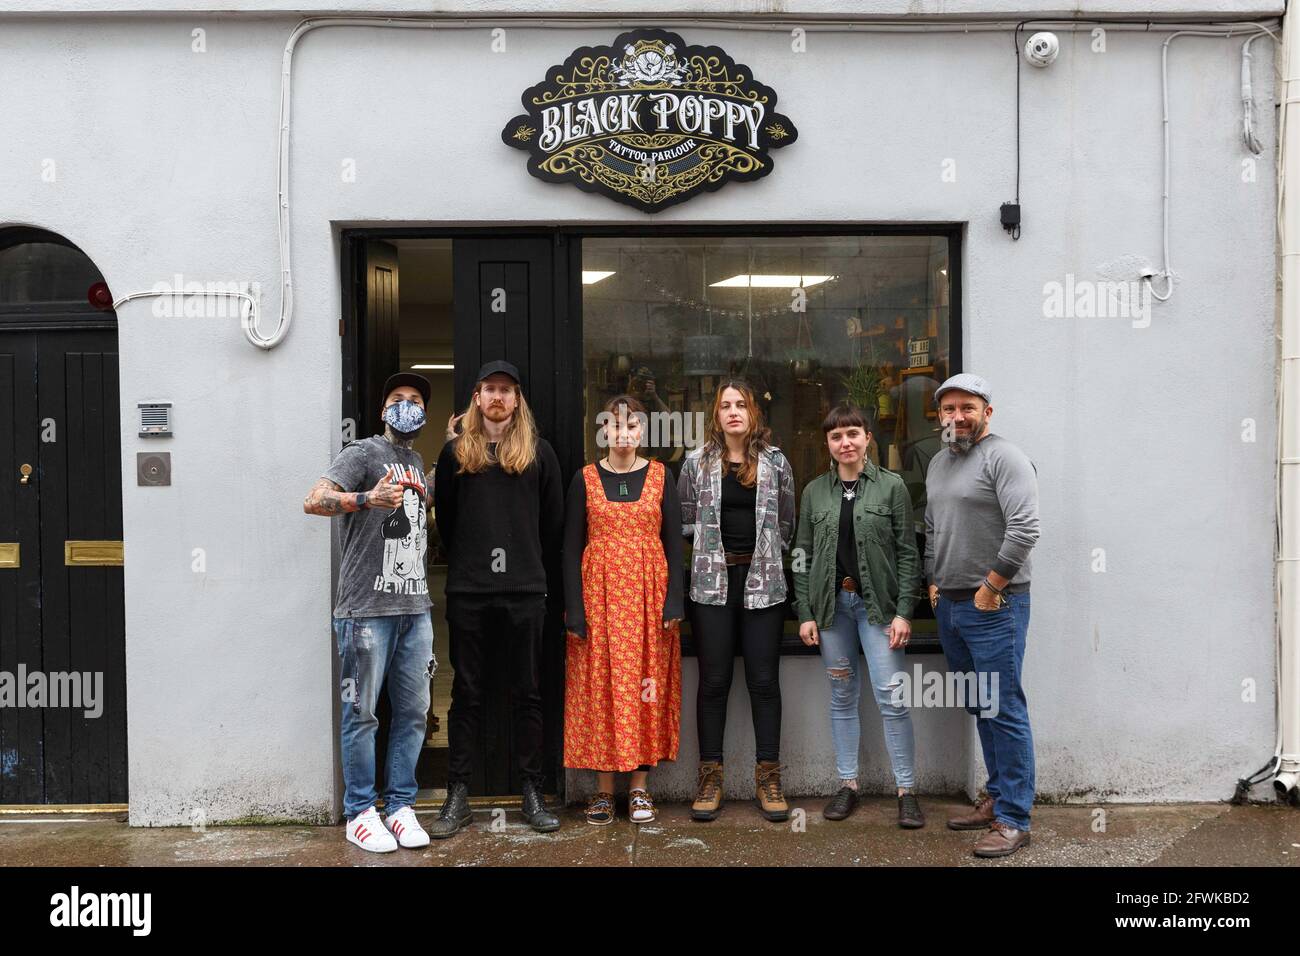 Cork, Ireland, 23rd May 2021. Black Poppy Tattoo Parlour Charity Event in Aid of Palestine Children's Relief Fund, Cork, Ireland. Pictured (LToR) are Andre Paula, Rob Sexton, Kim Cortis, Aoife Tierney, Gin Barbara Naggi (Owner), and Jake Stahlecker (Owner) Black Poppy Tattoo Parlour in Father Matthew Street, Cork ran a charity tattoo event today in aid of the Palestine Children's Relief Fund. Credit: Damian Coleman/Alamy Live News Stock Photo